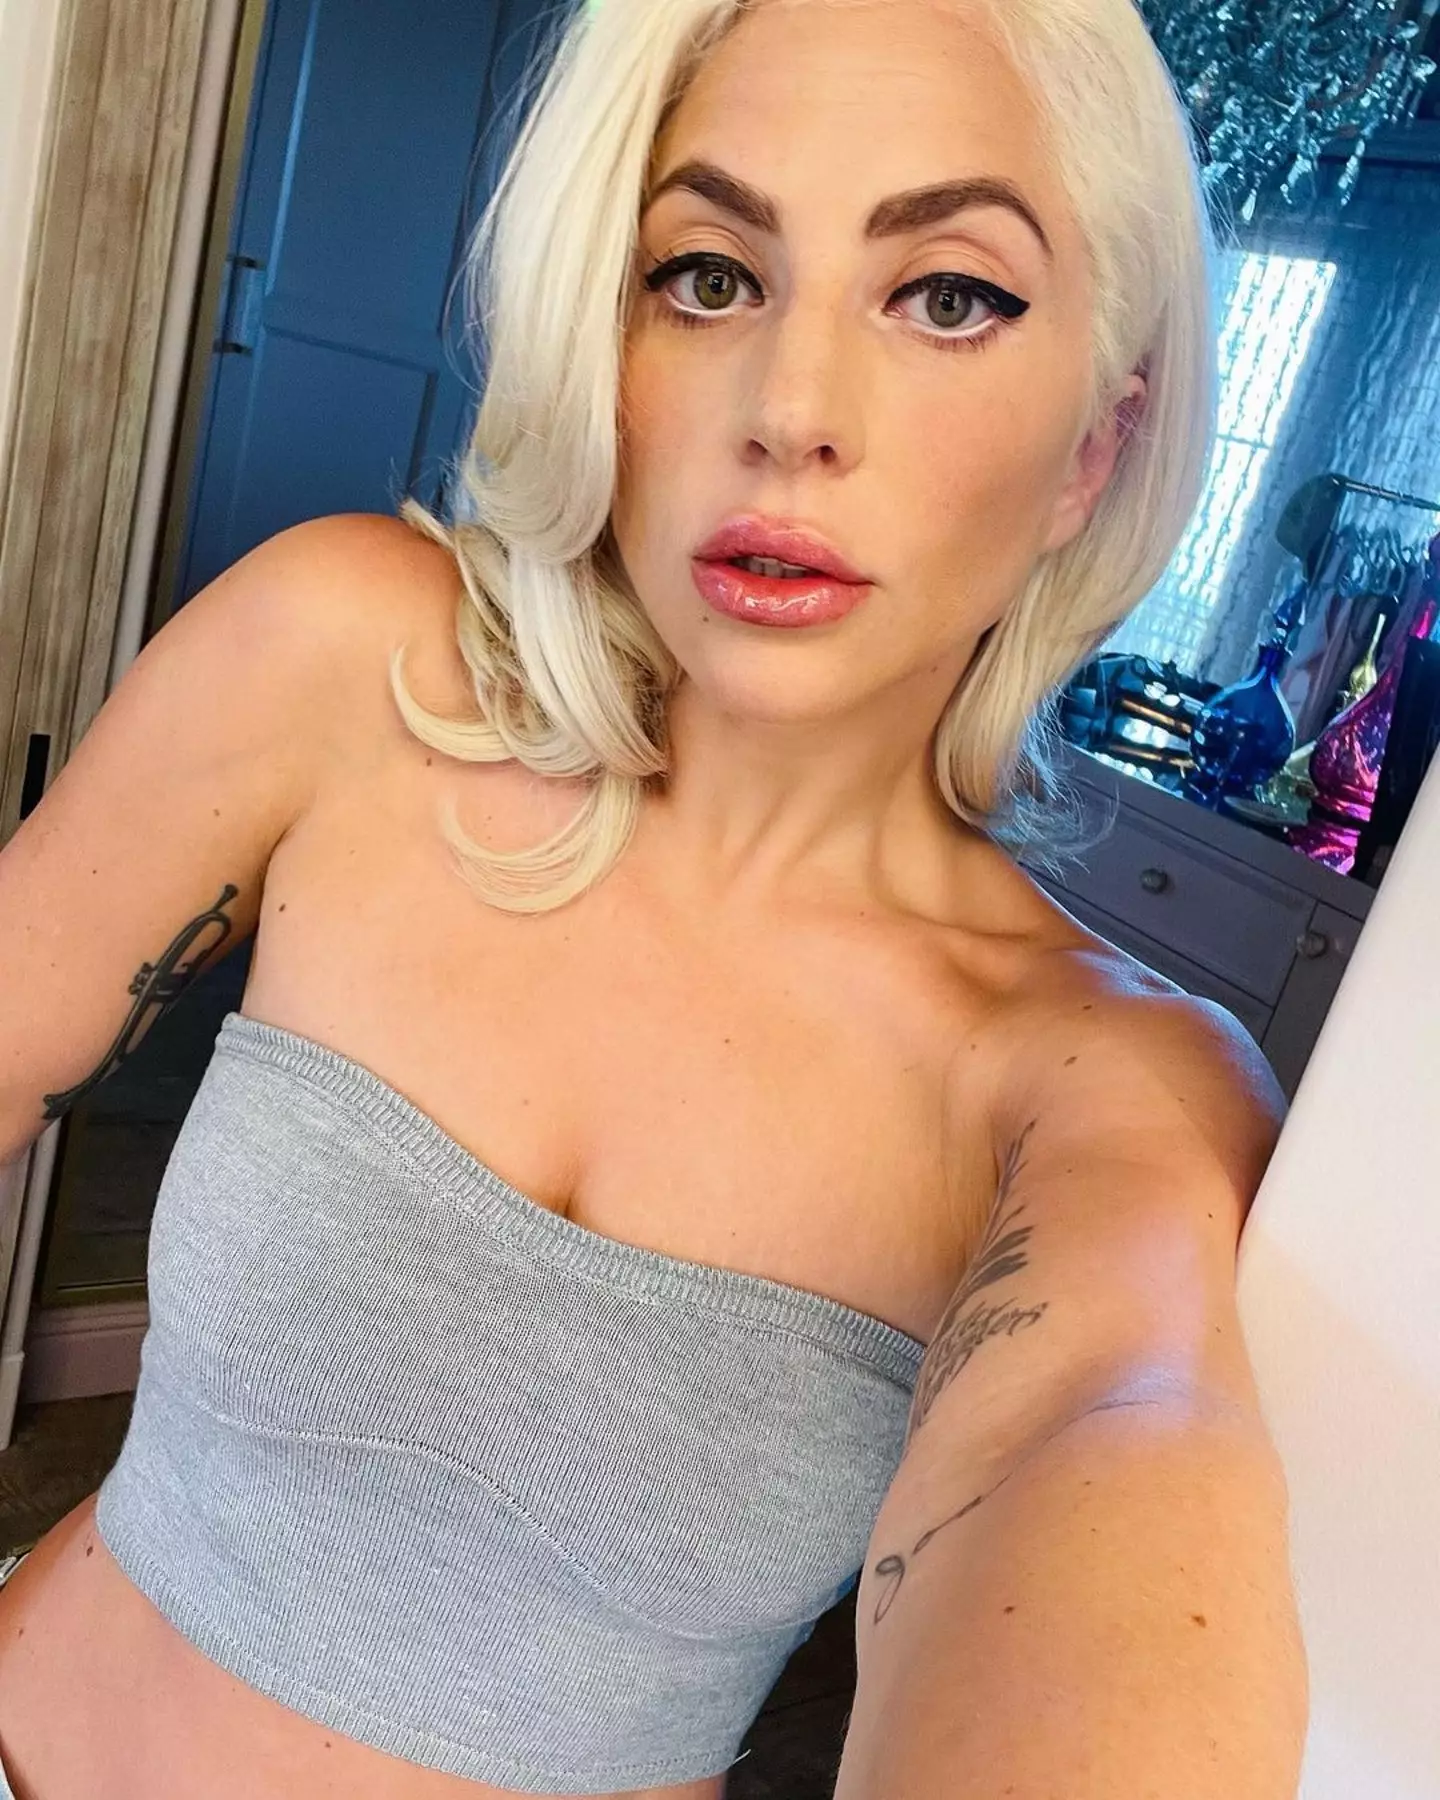 Lady Gaga decided to go celibate to stop partners stealing creativity through her vagina.